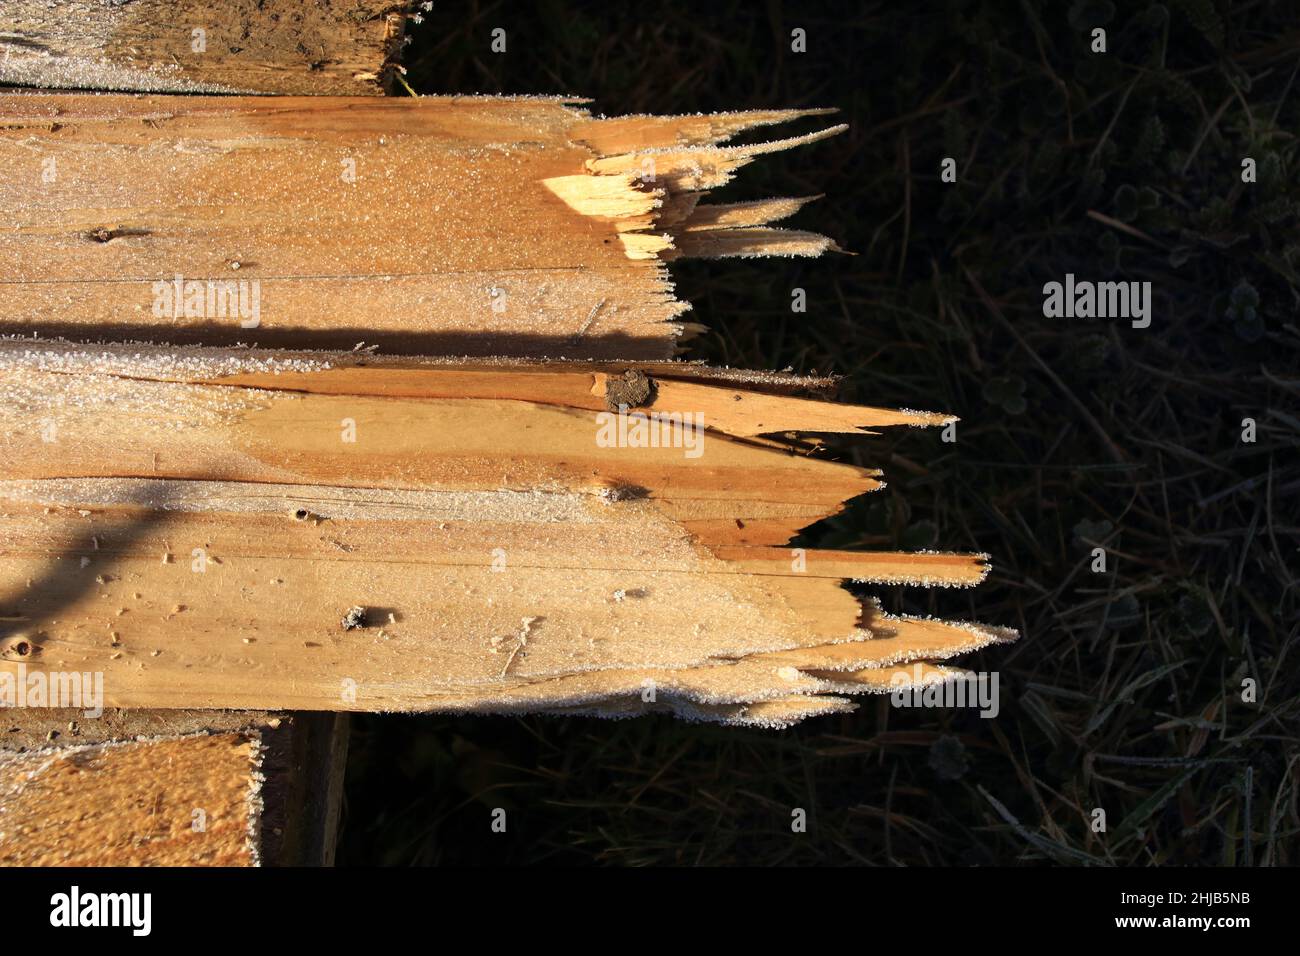 Breaking edge on a plank of lumber Stock Photo